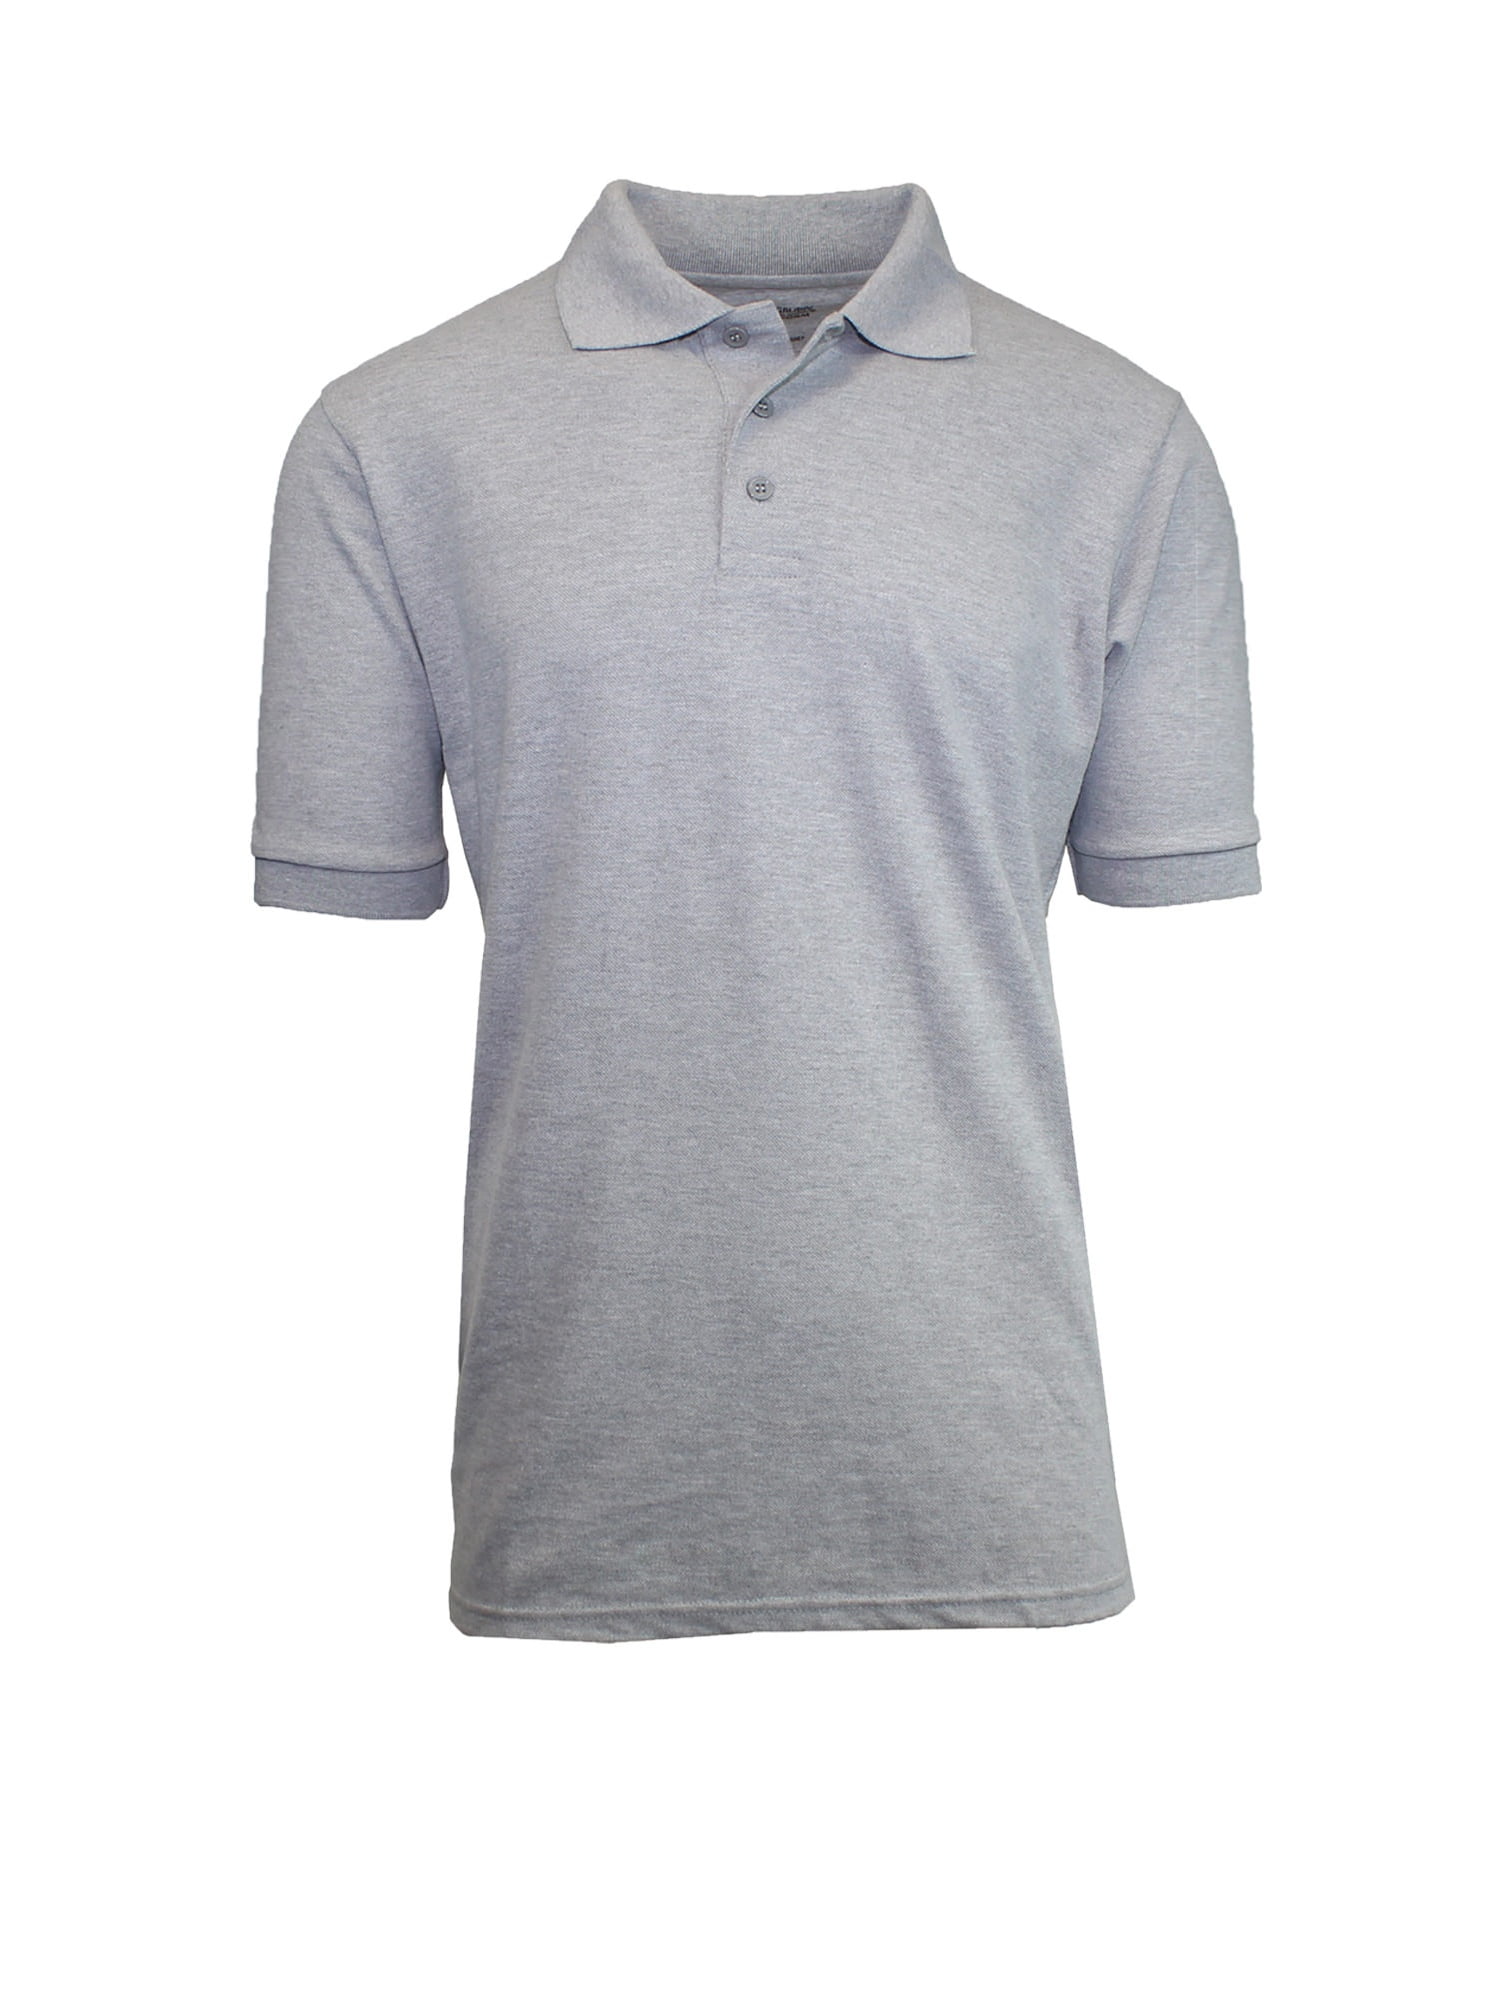 Classic Short-Sleeved Piqué Polo - Ready-to-Wear 1A2IJZ